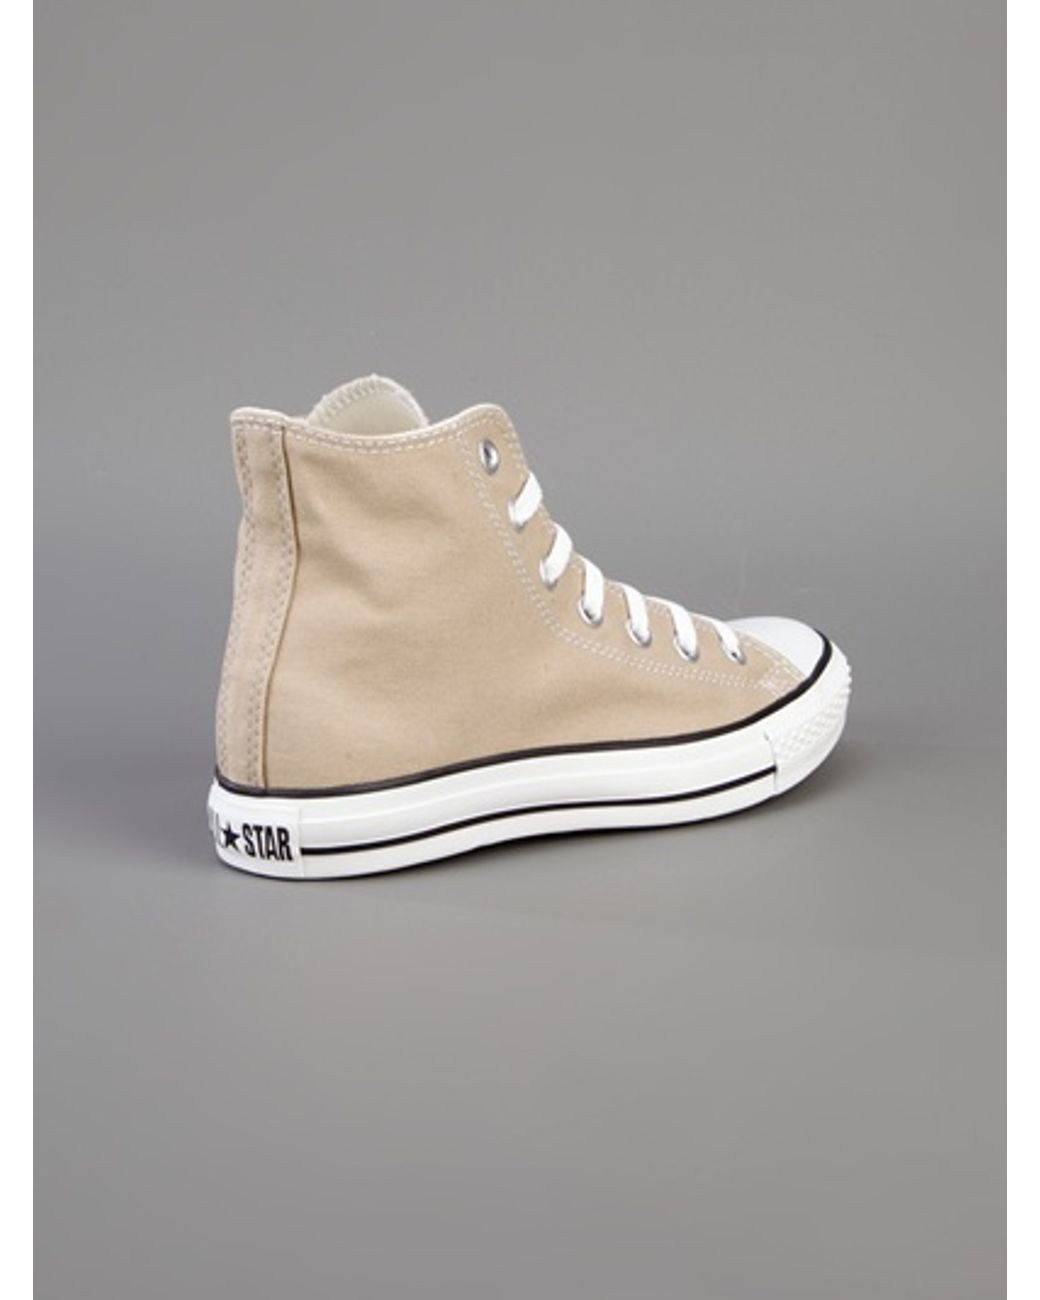 Converse Hi-top Canvas Sneakers in Nude (Natural) | Lyst UK